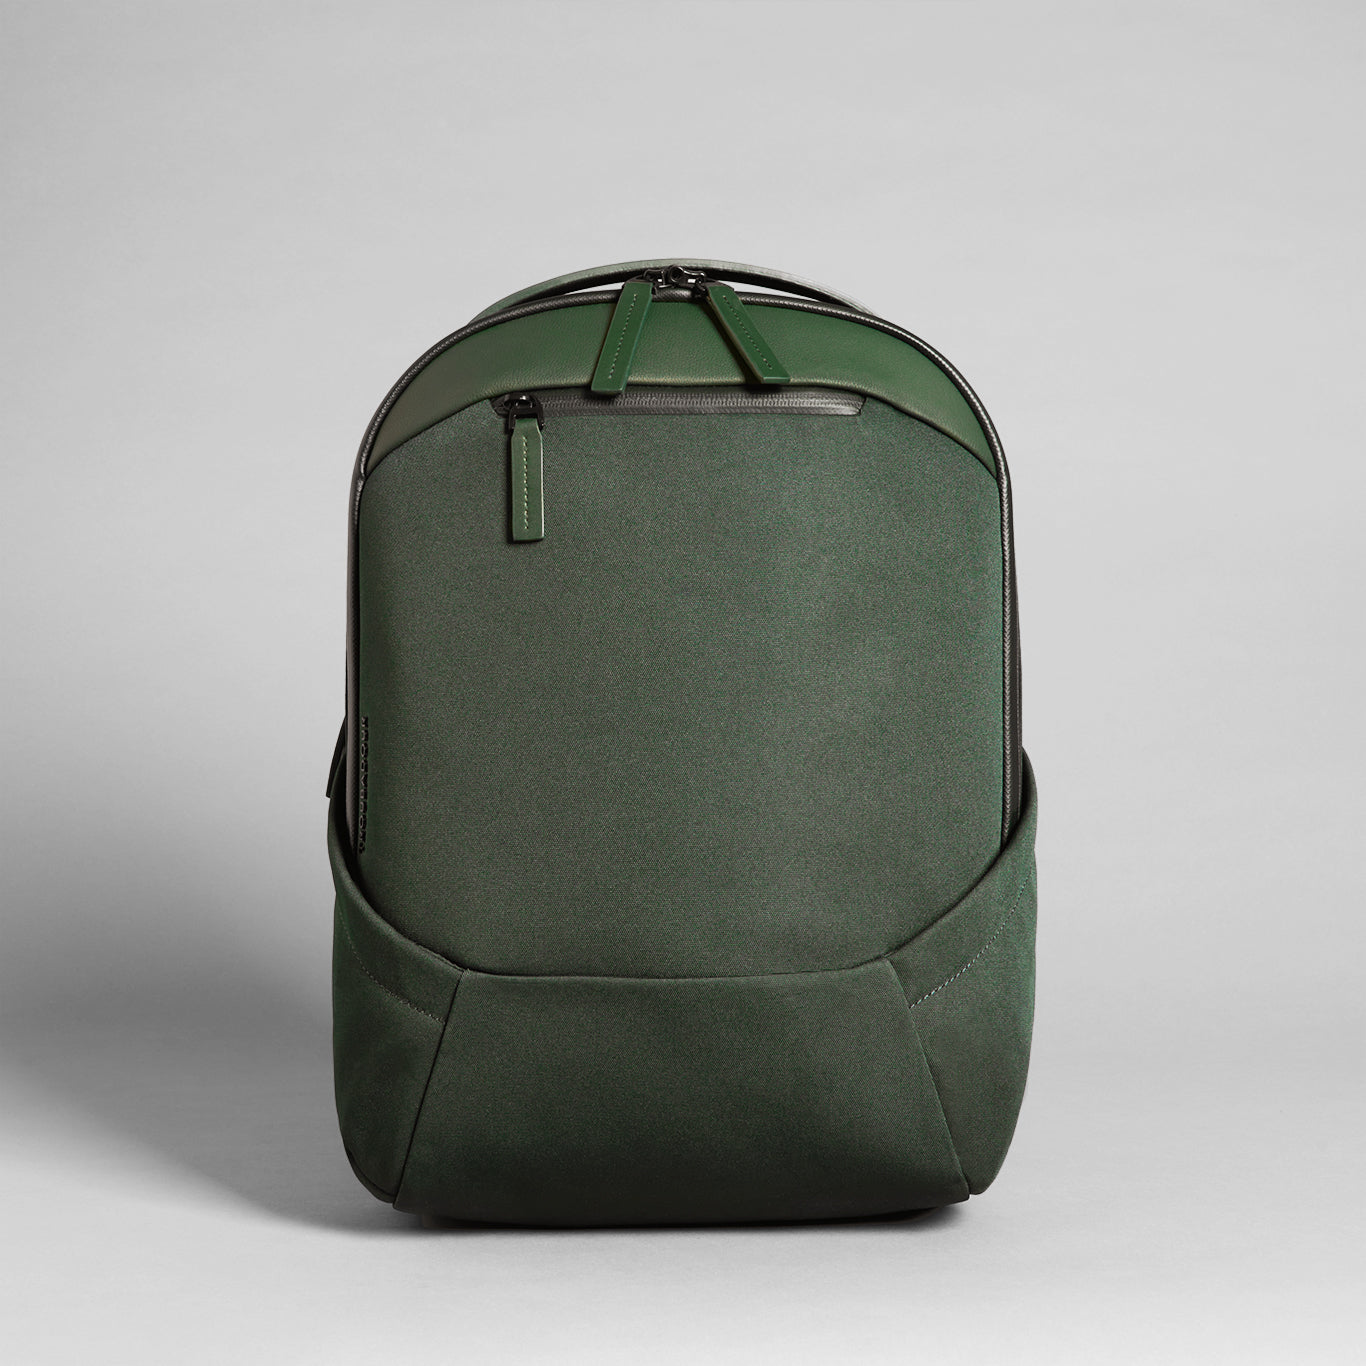 Apex Compact Backpack 3.0